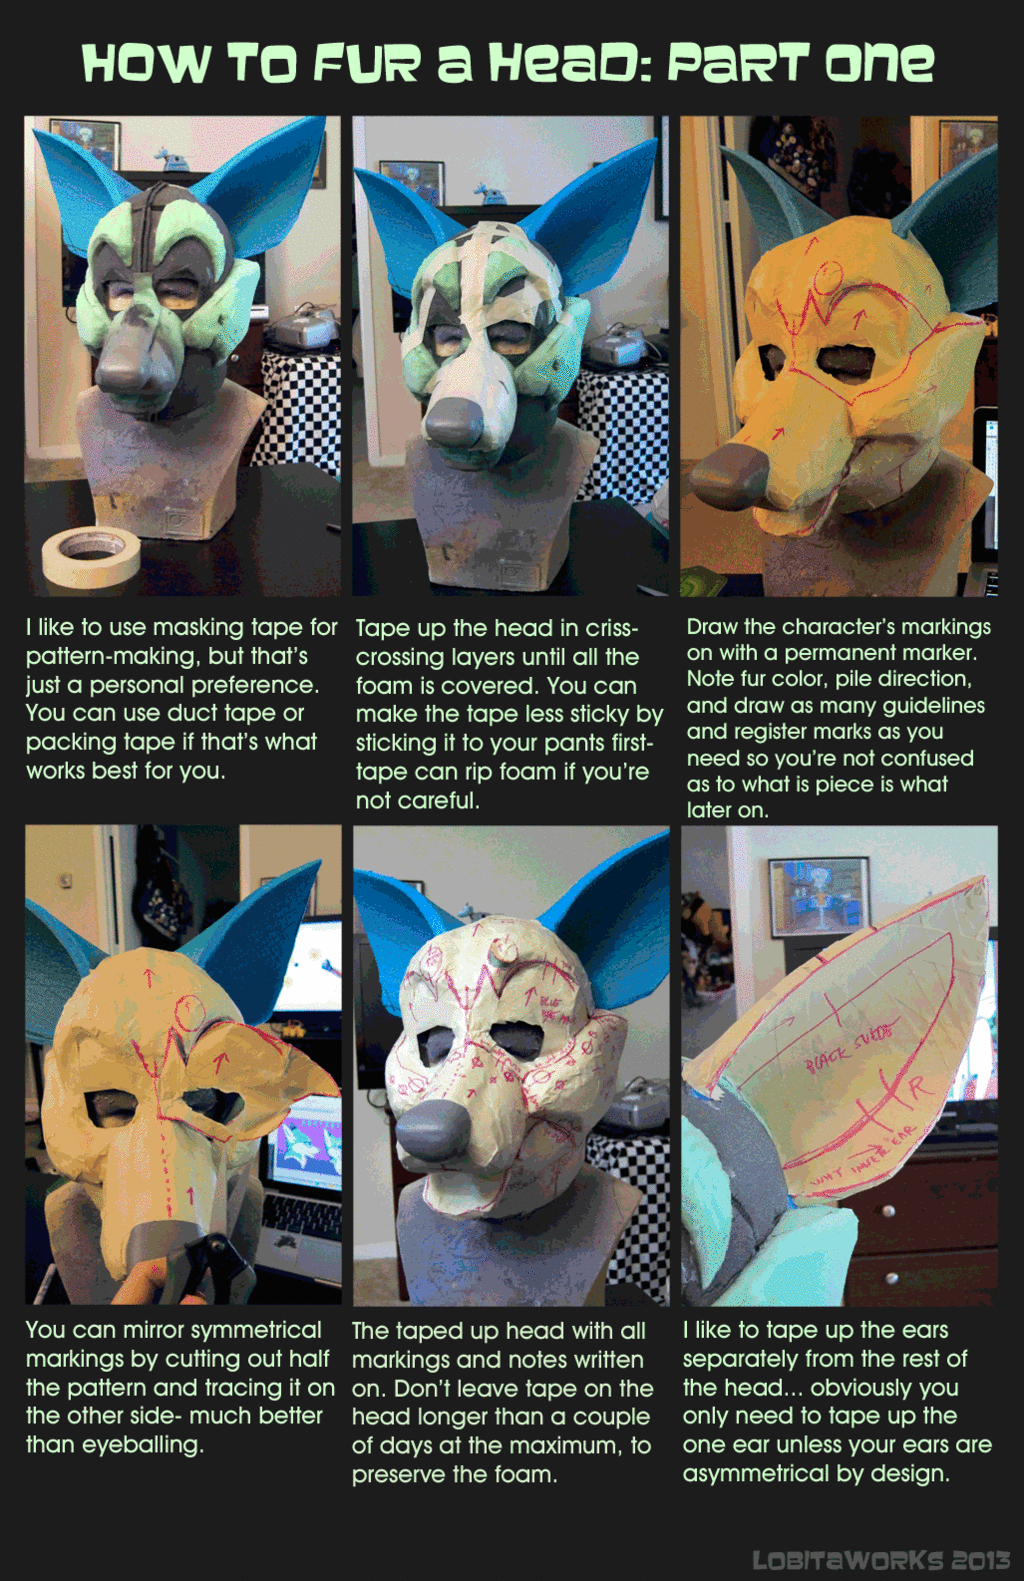 How to Fur a Head: Part One